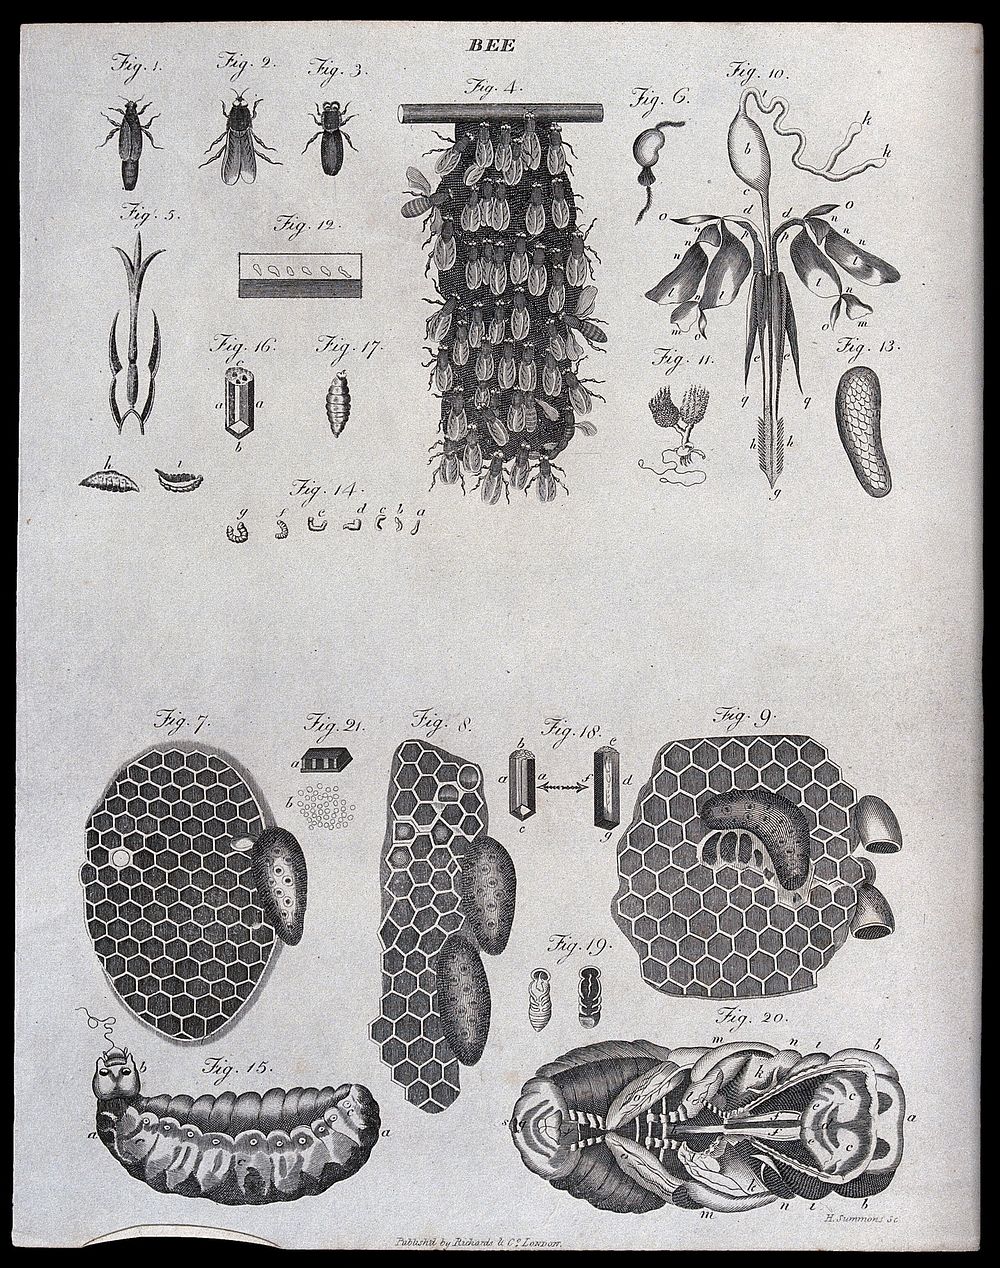 Apiculture: bees, combs and swarms. Engraving by H. Summons.